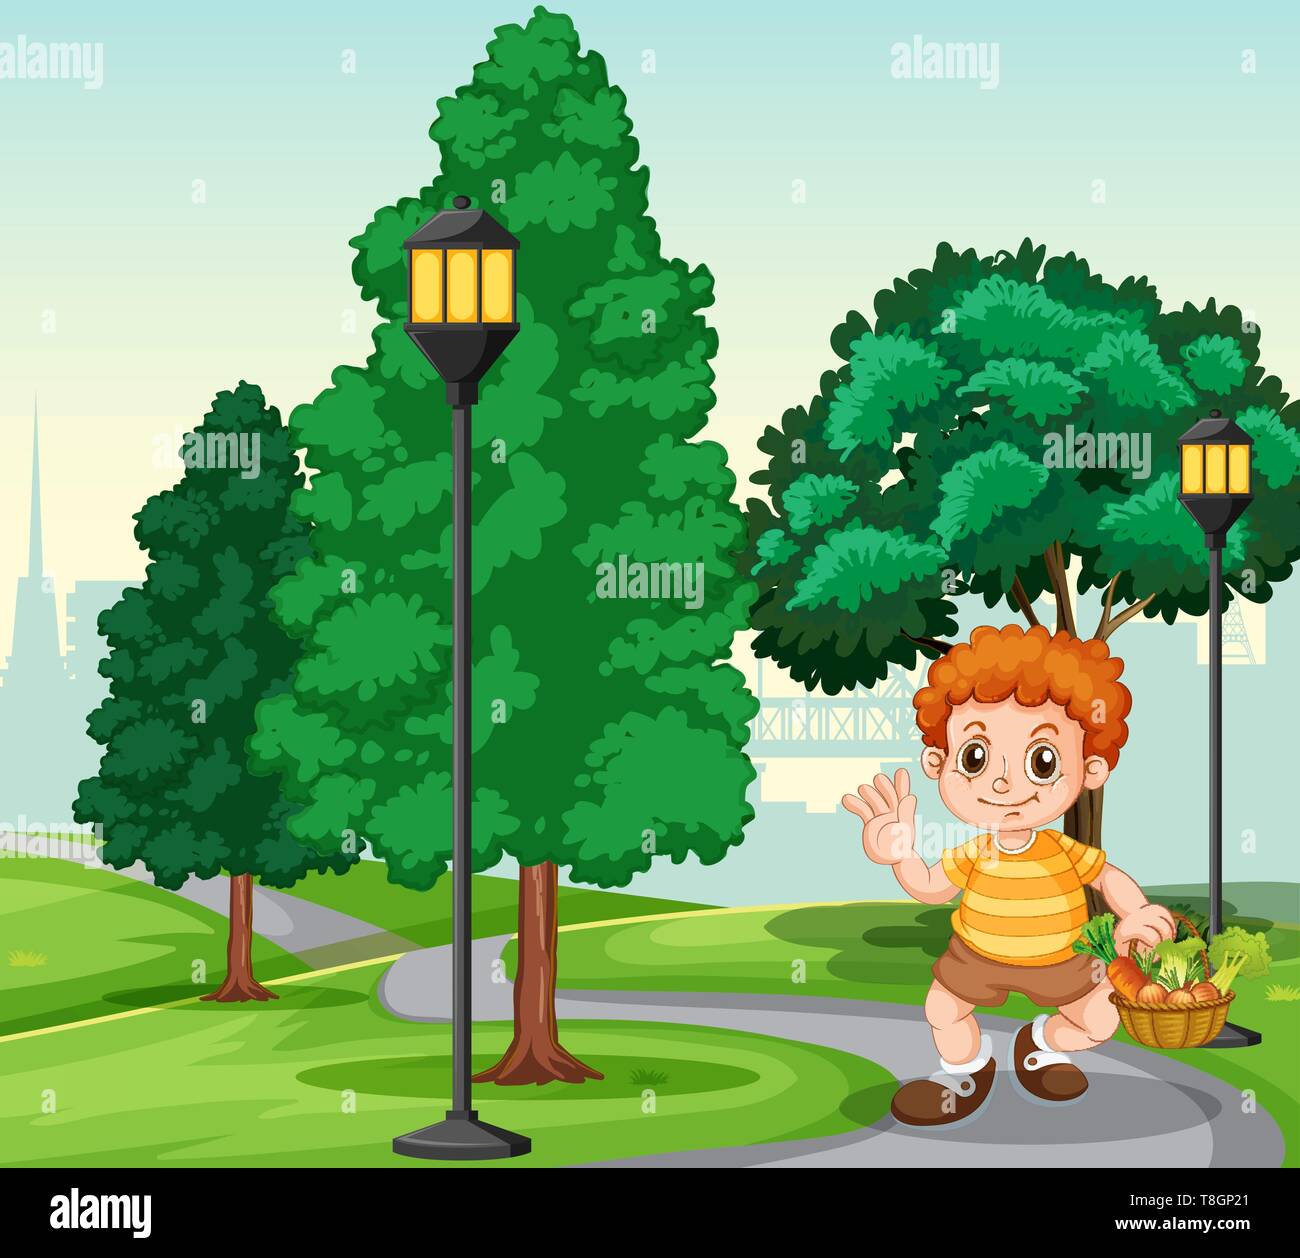 A boy with basket in the park illustration Stock Vector